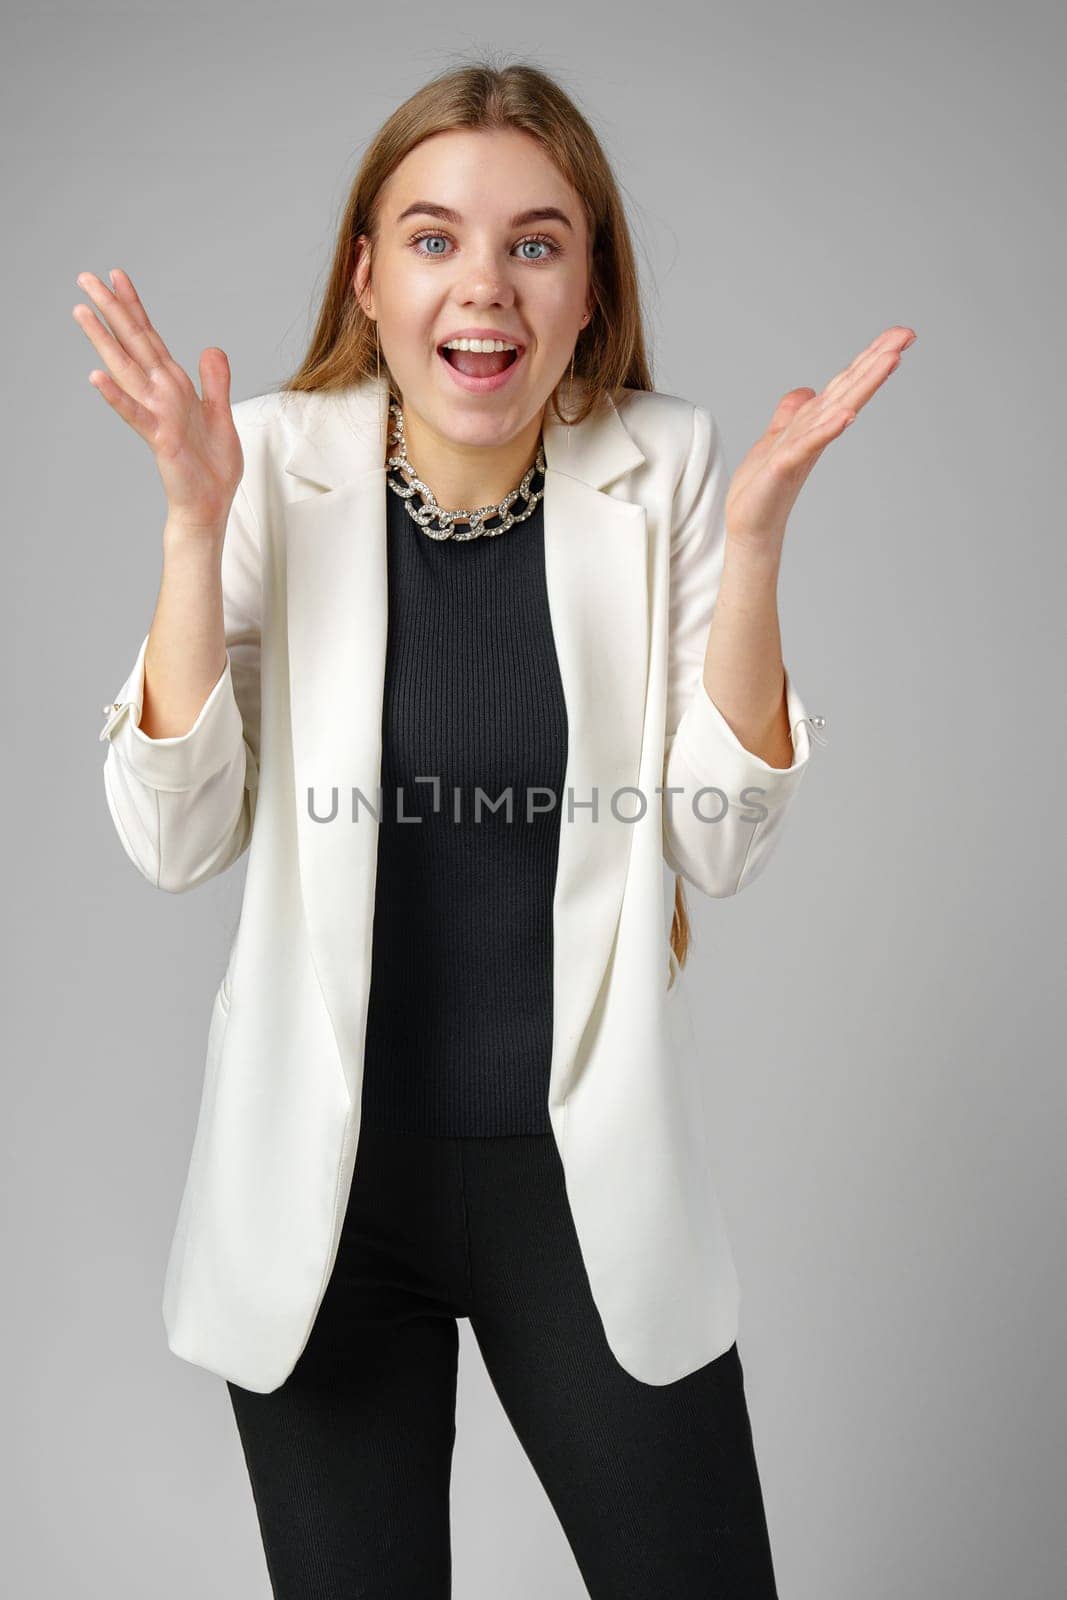 Excited Young Woman in Stylish Outfit Surprised Expression by Fabrikasimf